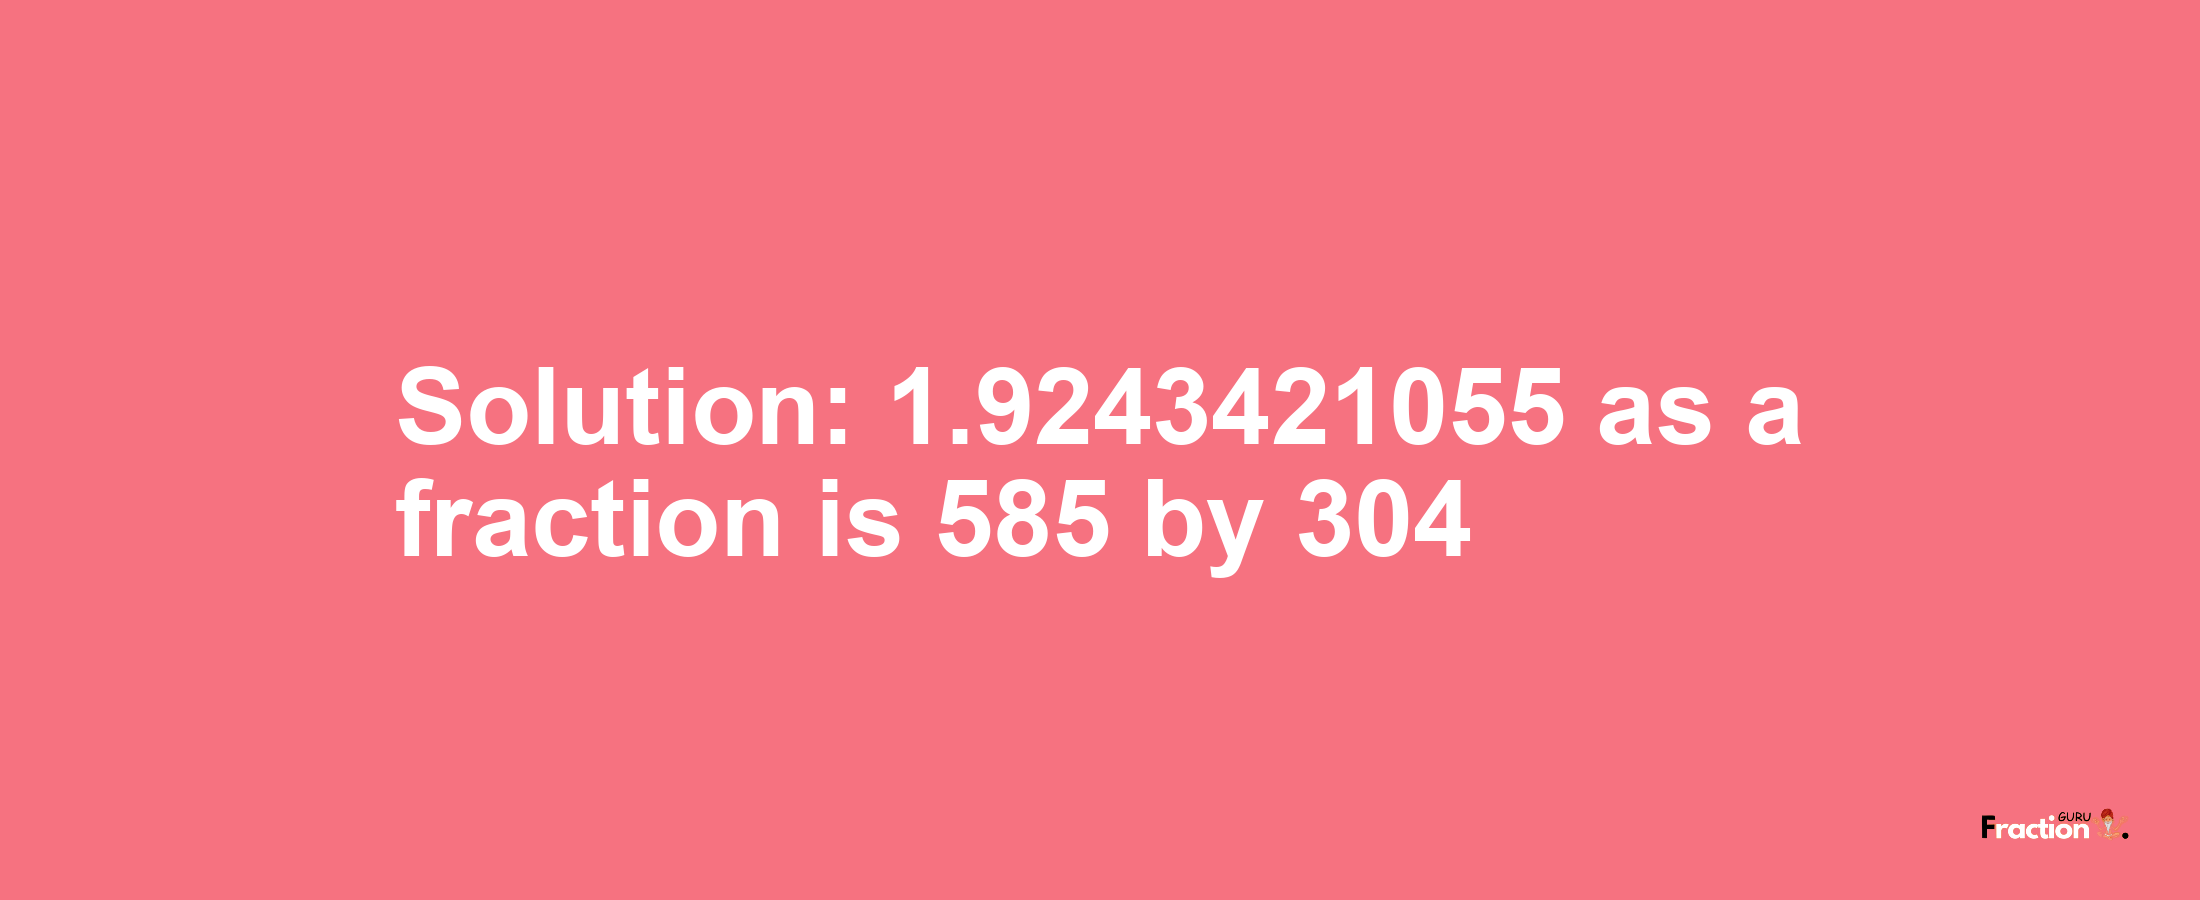 Solution:1.9243421055 as a fraction is 585/304